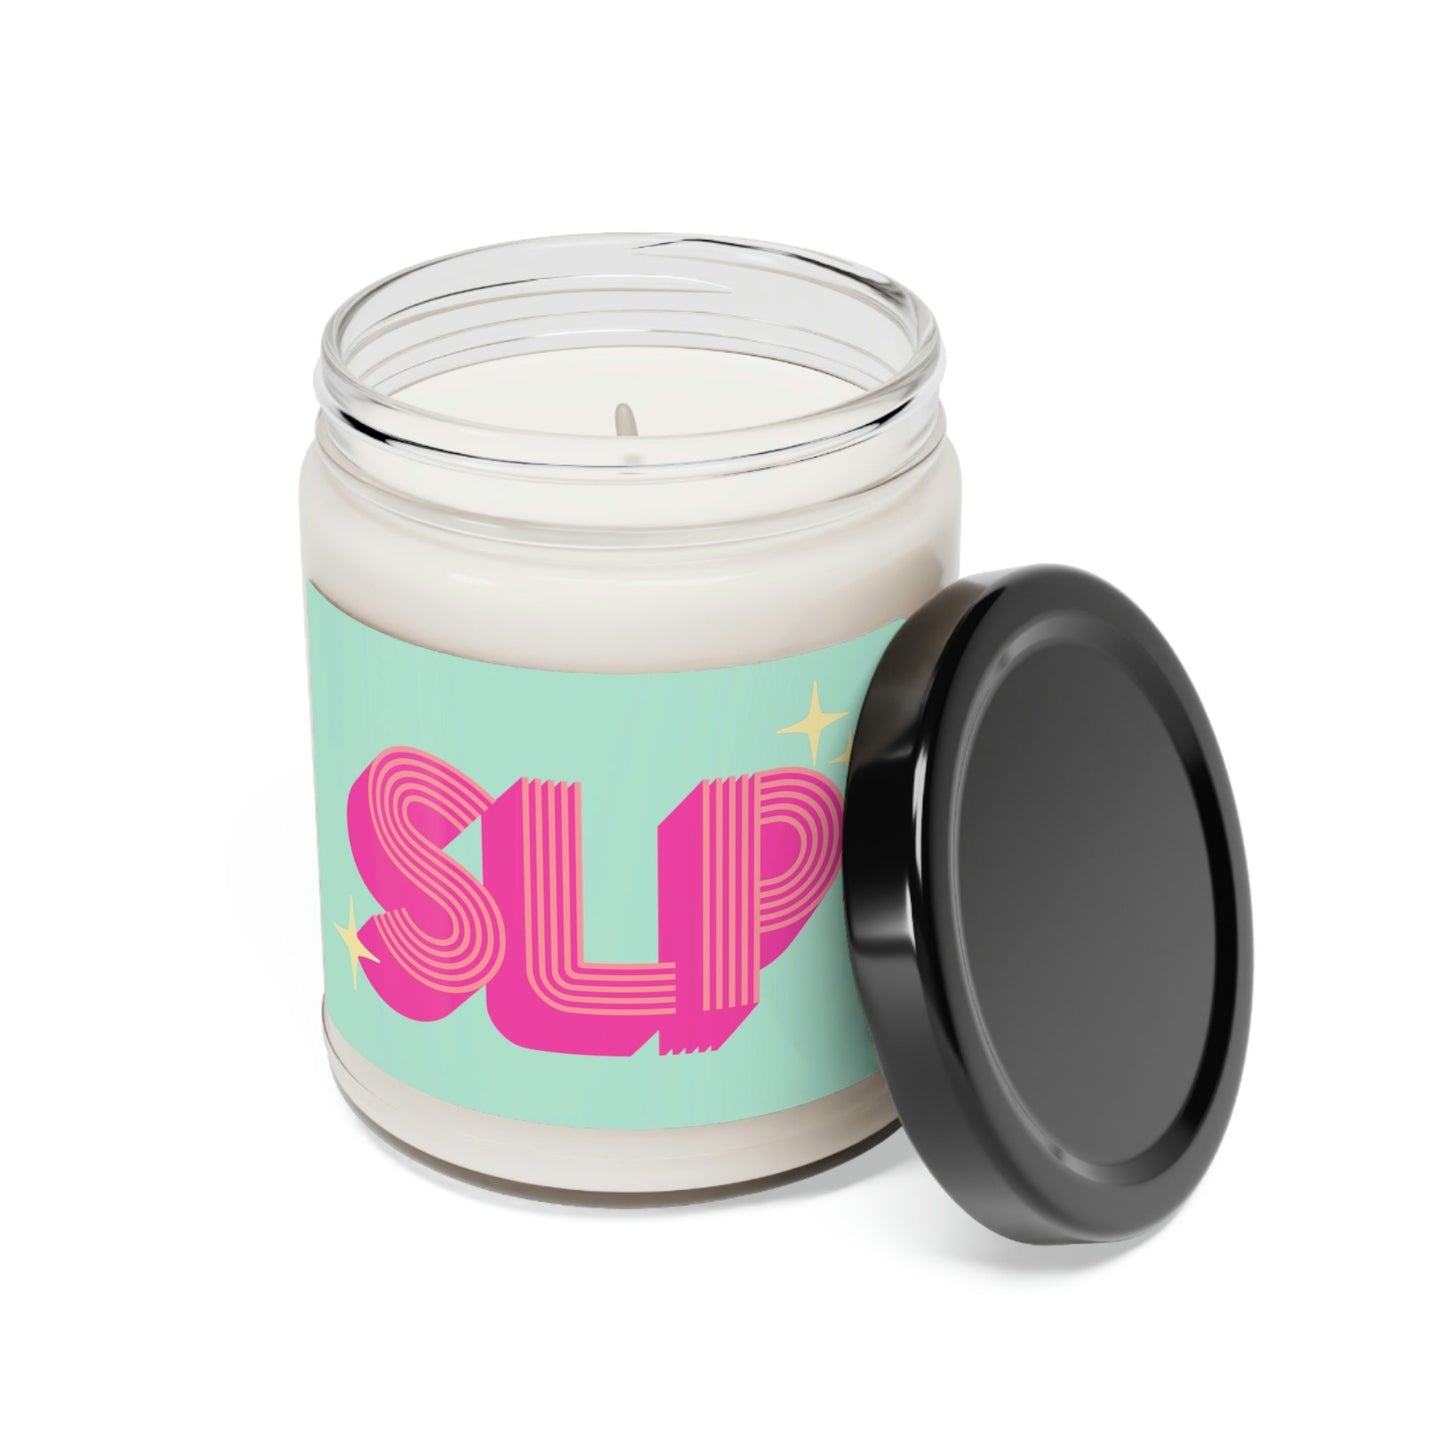 SLP Retro Mint Pink Scented Candle, 9 oz.